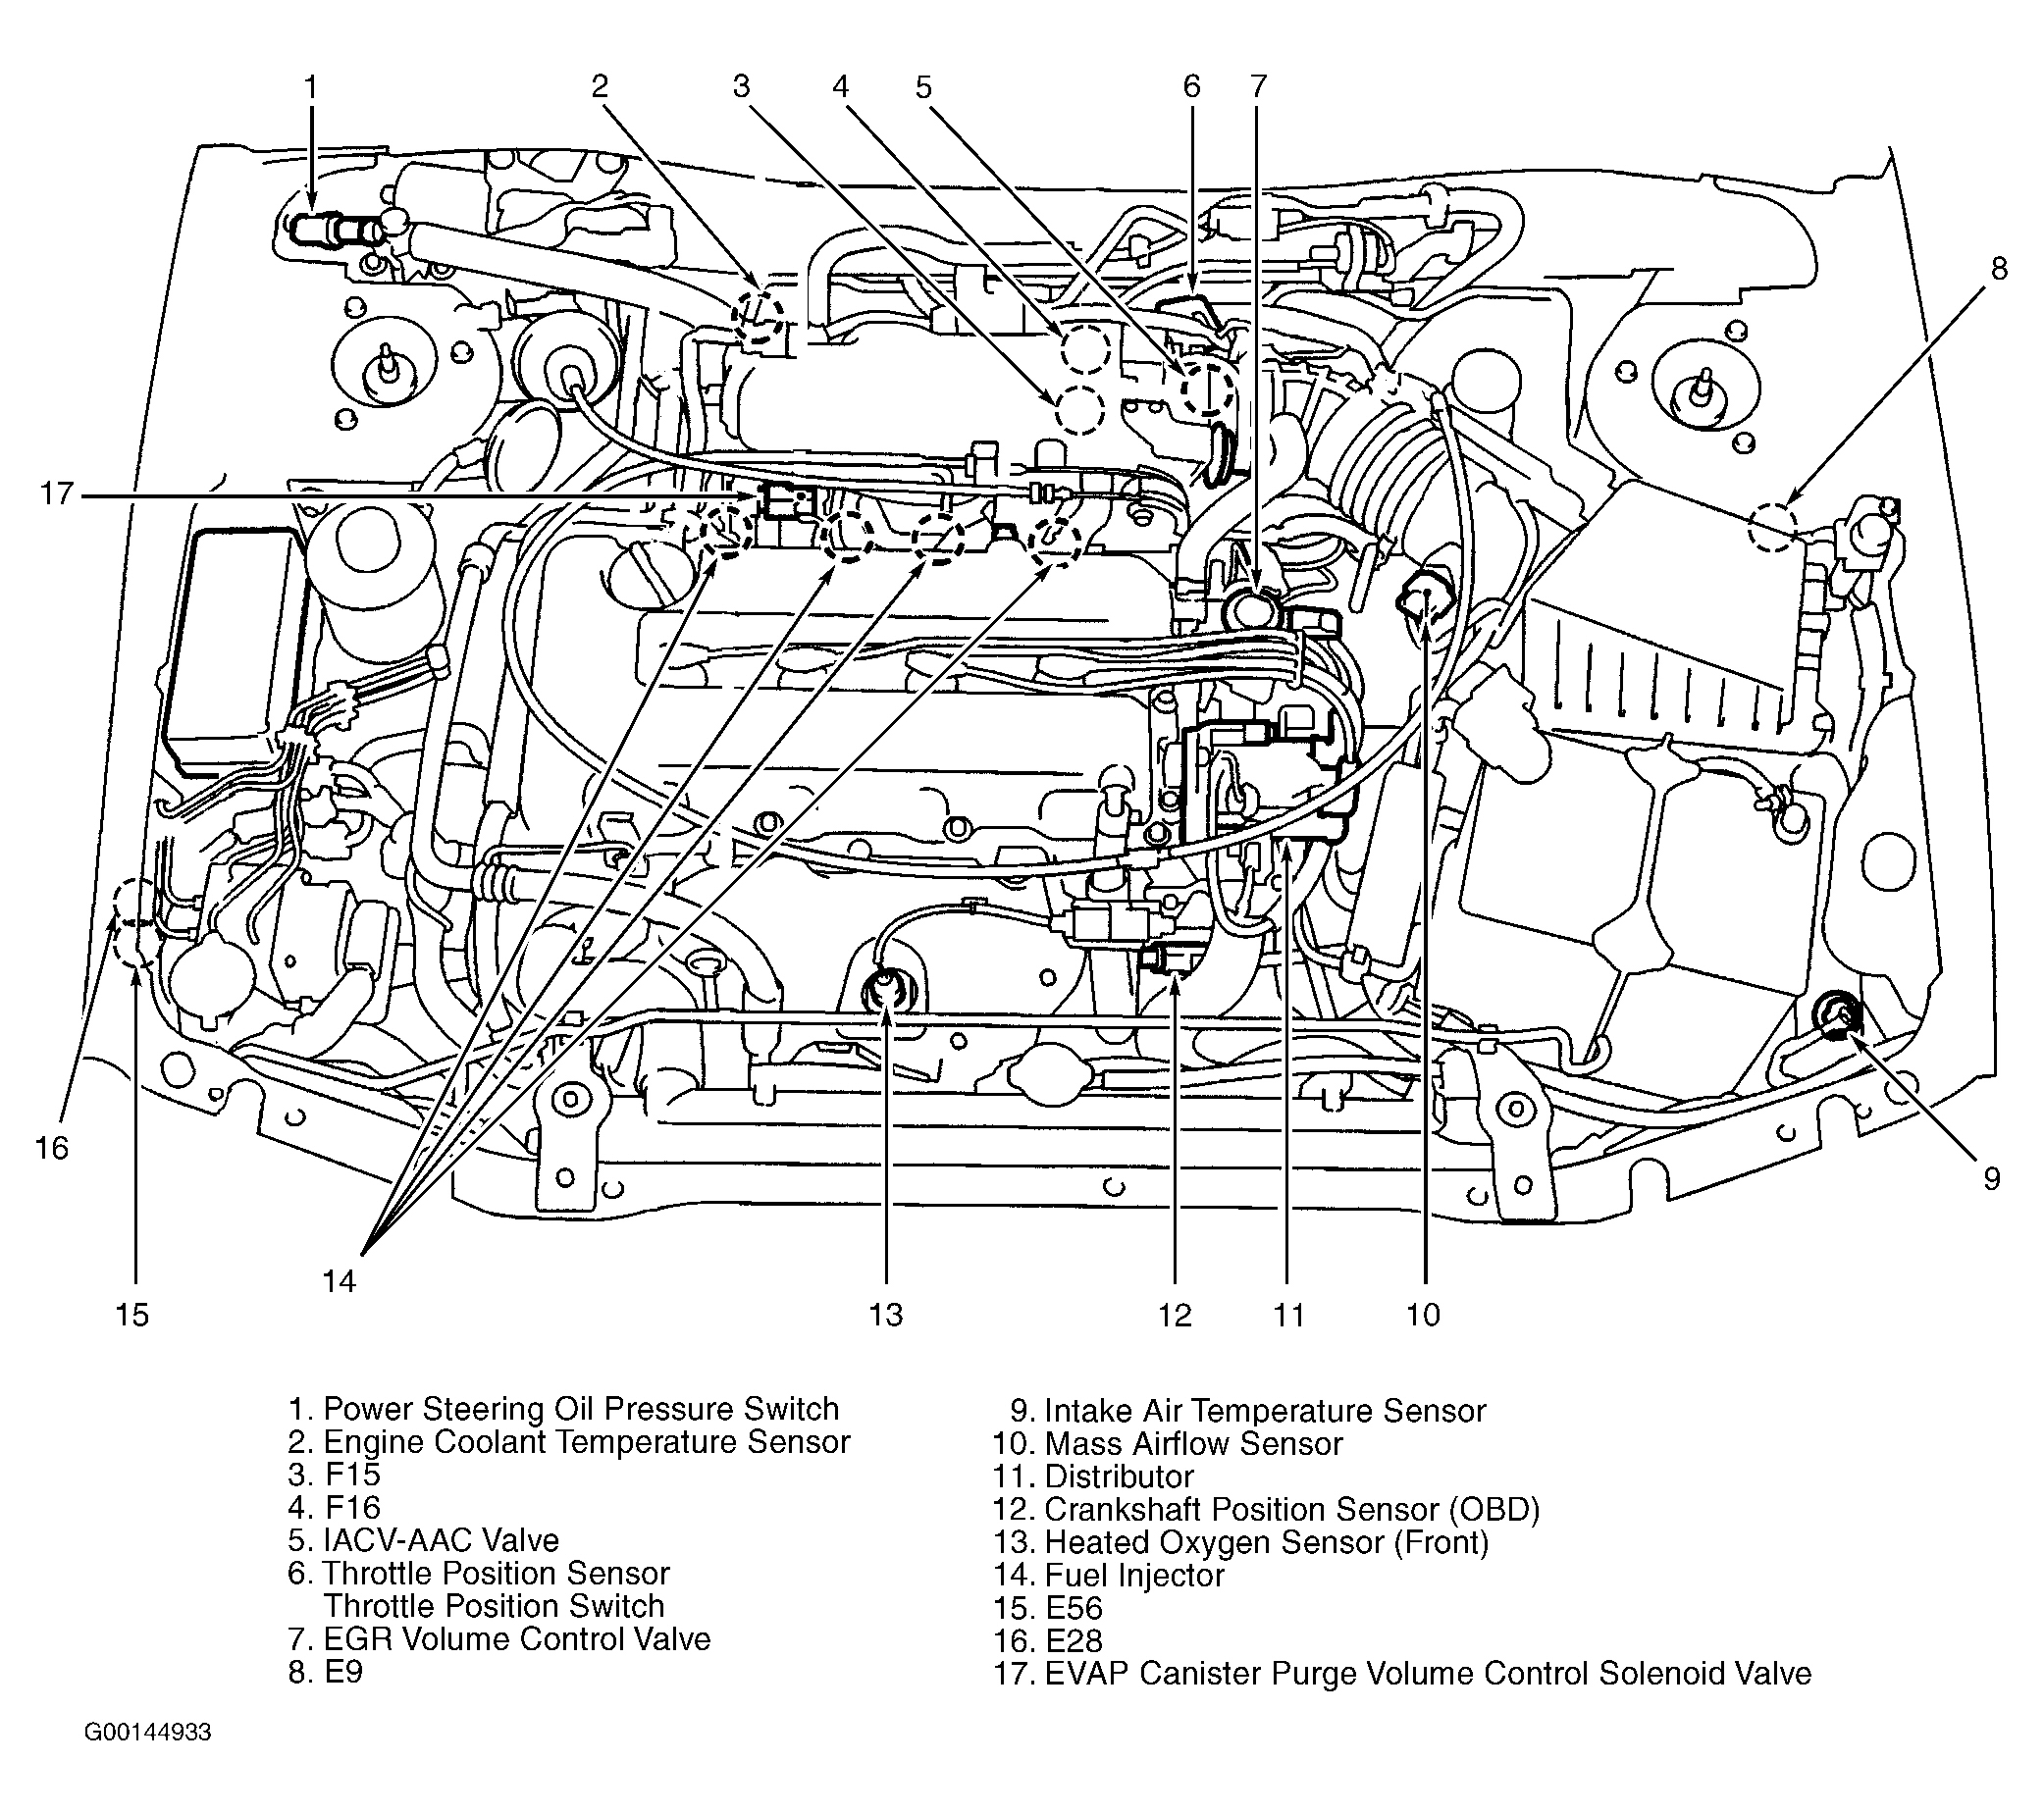 Infiniti G20 2001 - Component Locations -  Engine Compartment